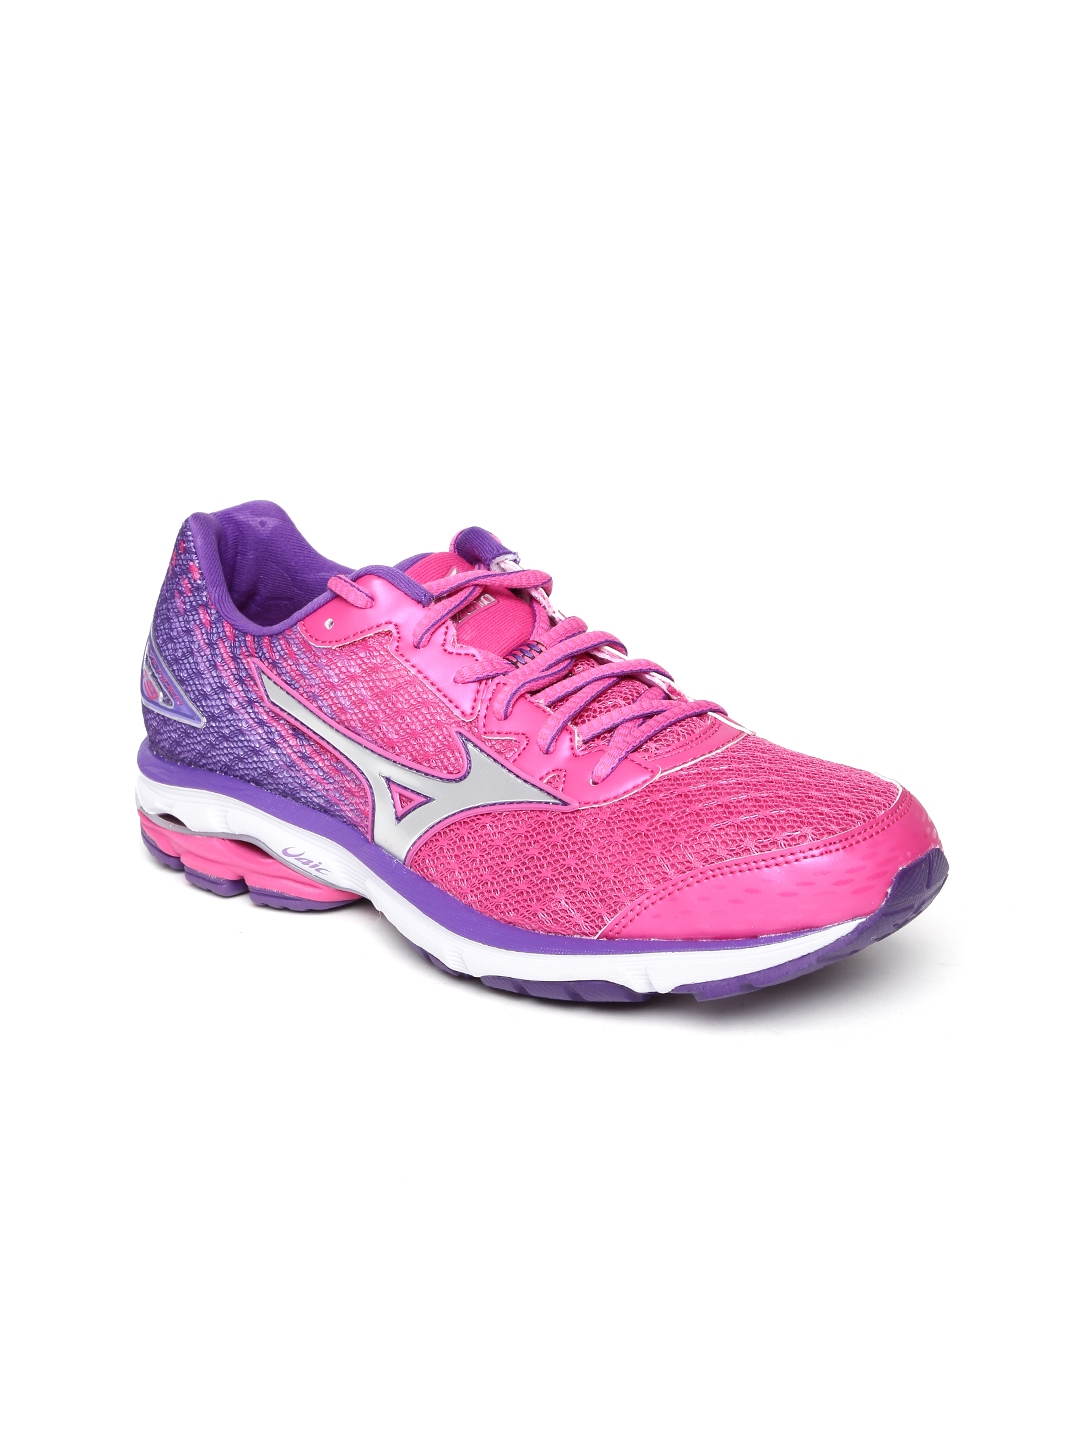 Buy Mizuno Women Pink Wave Rider 19 Running Shoes - Sports Shoes for ...